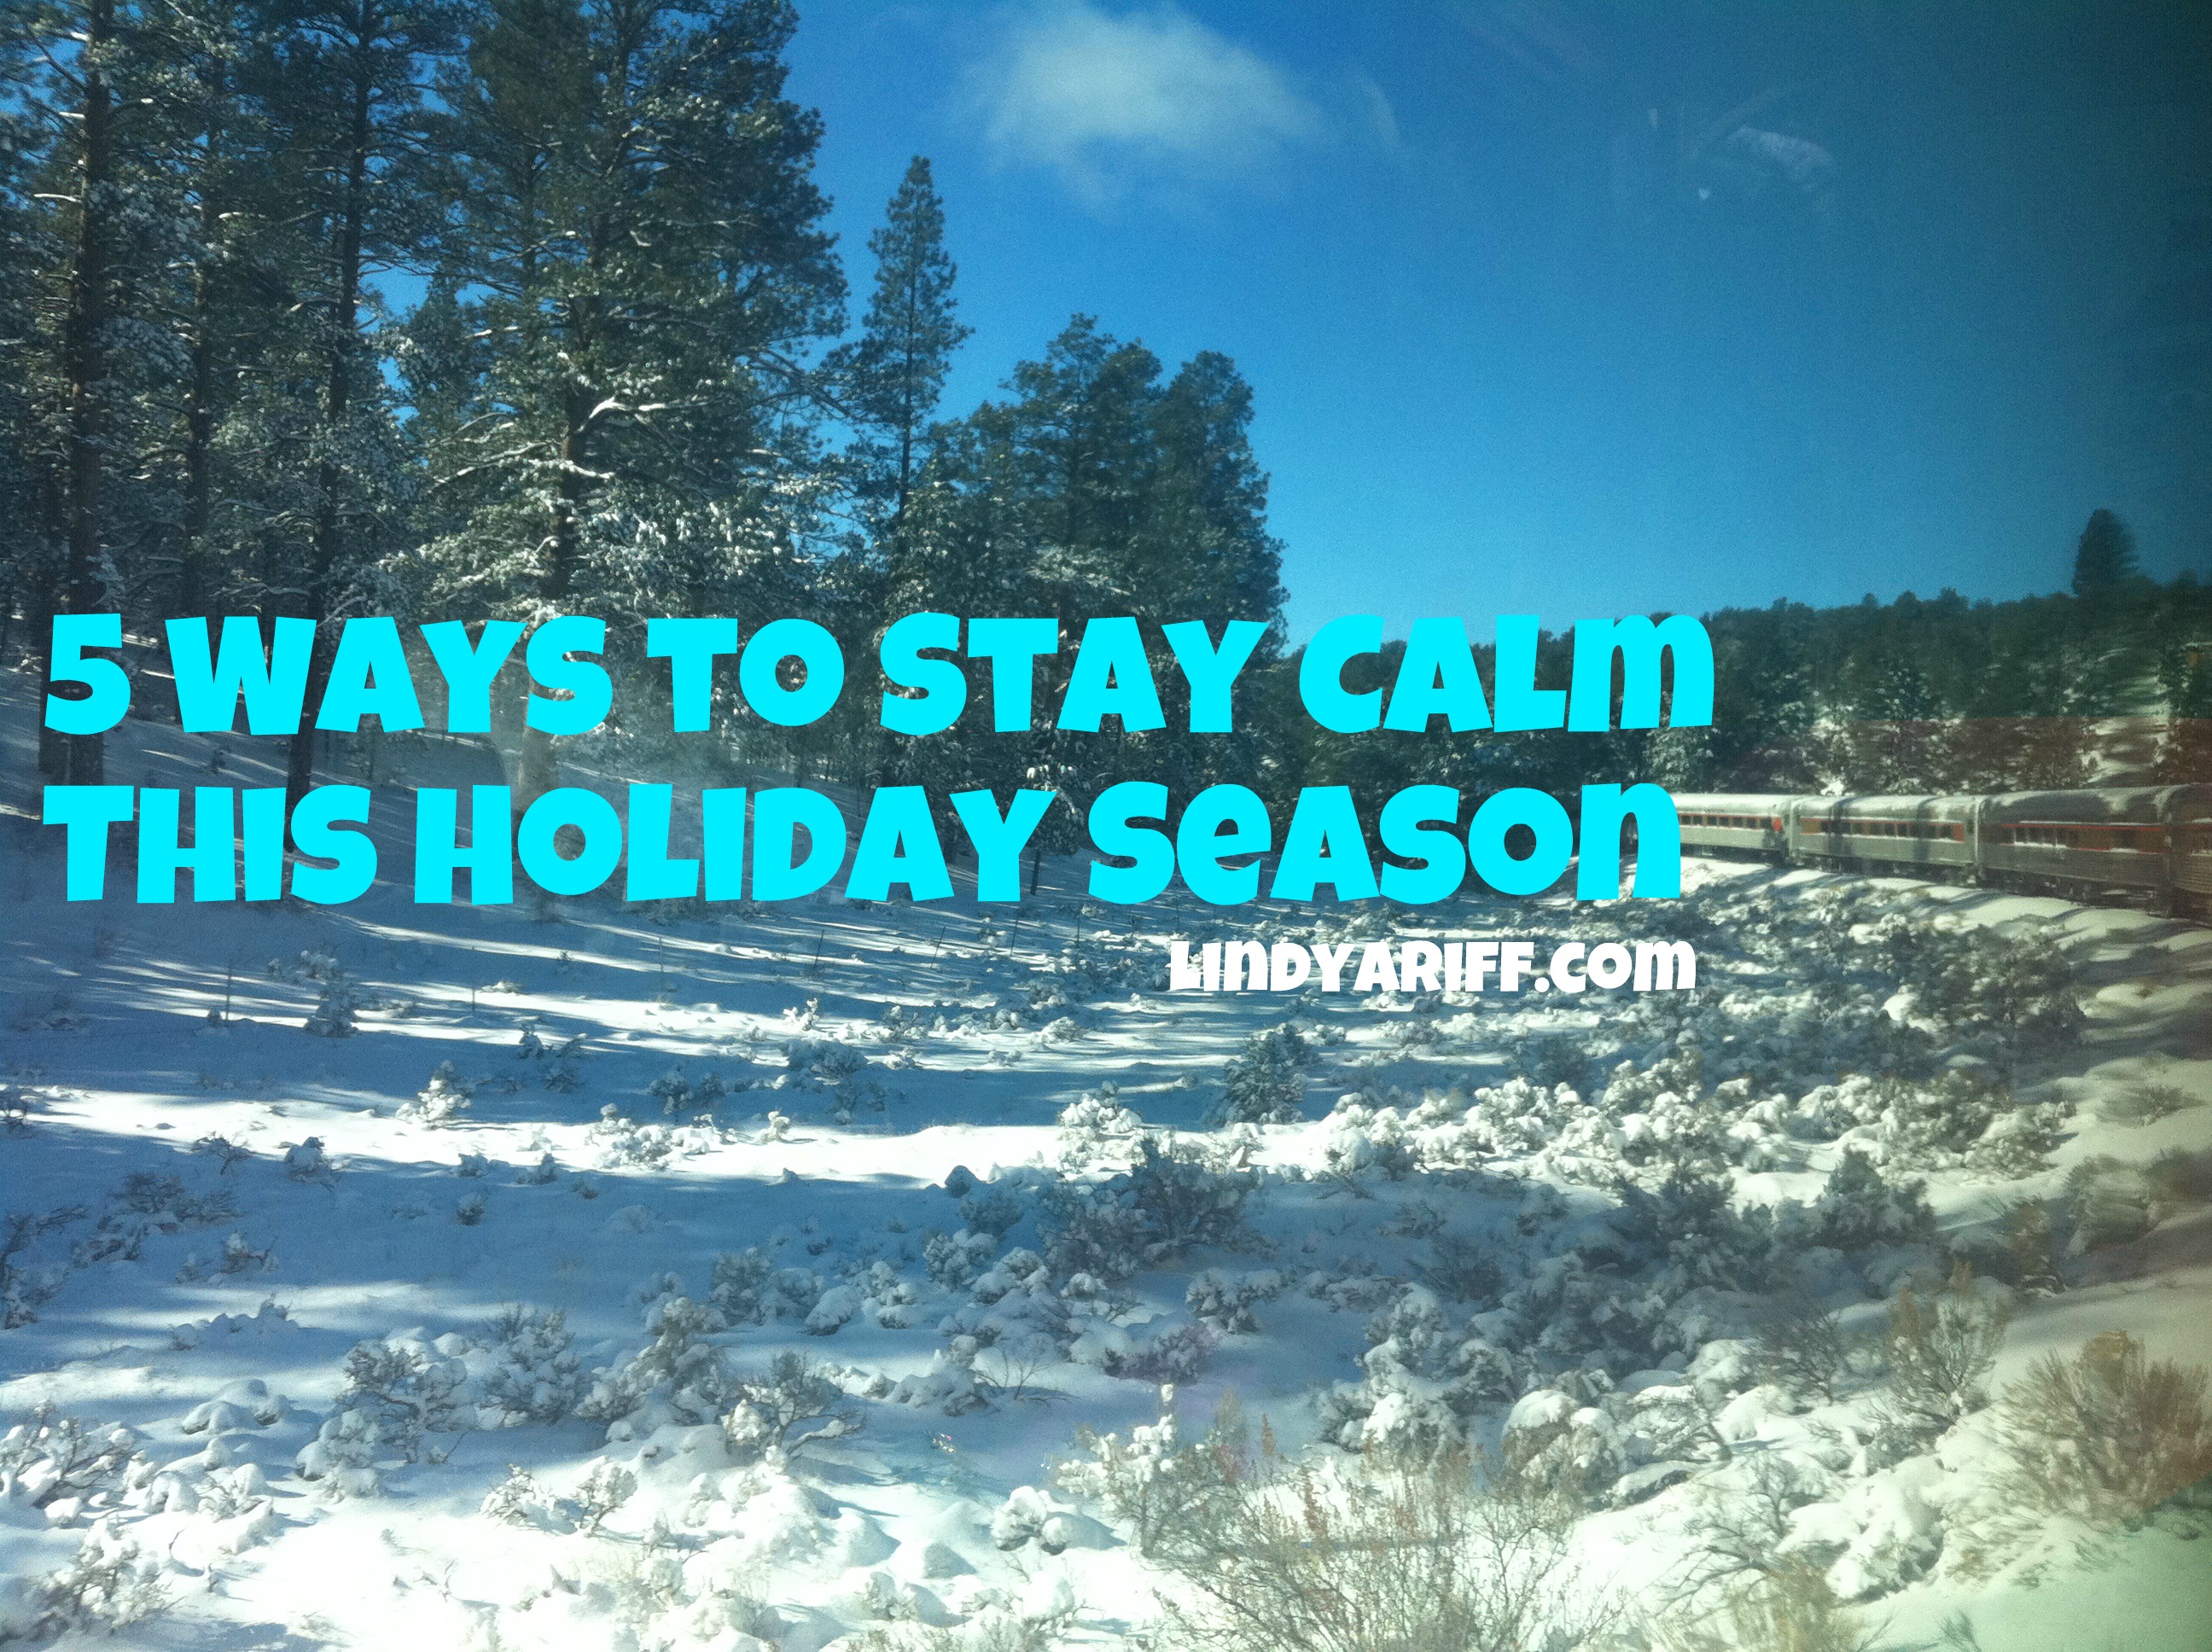 5 Ways to Stay Calm This Holiday Season